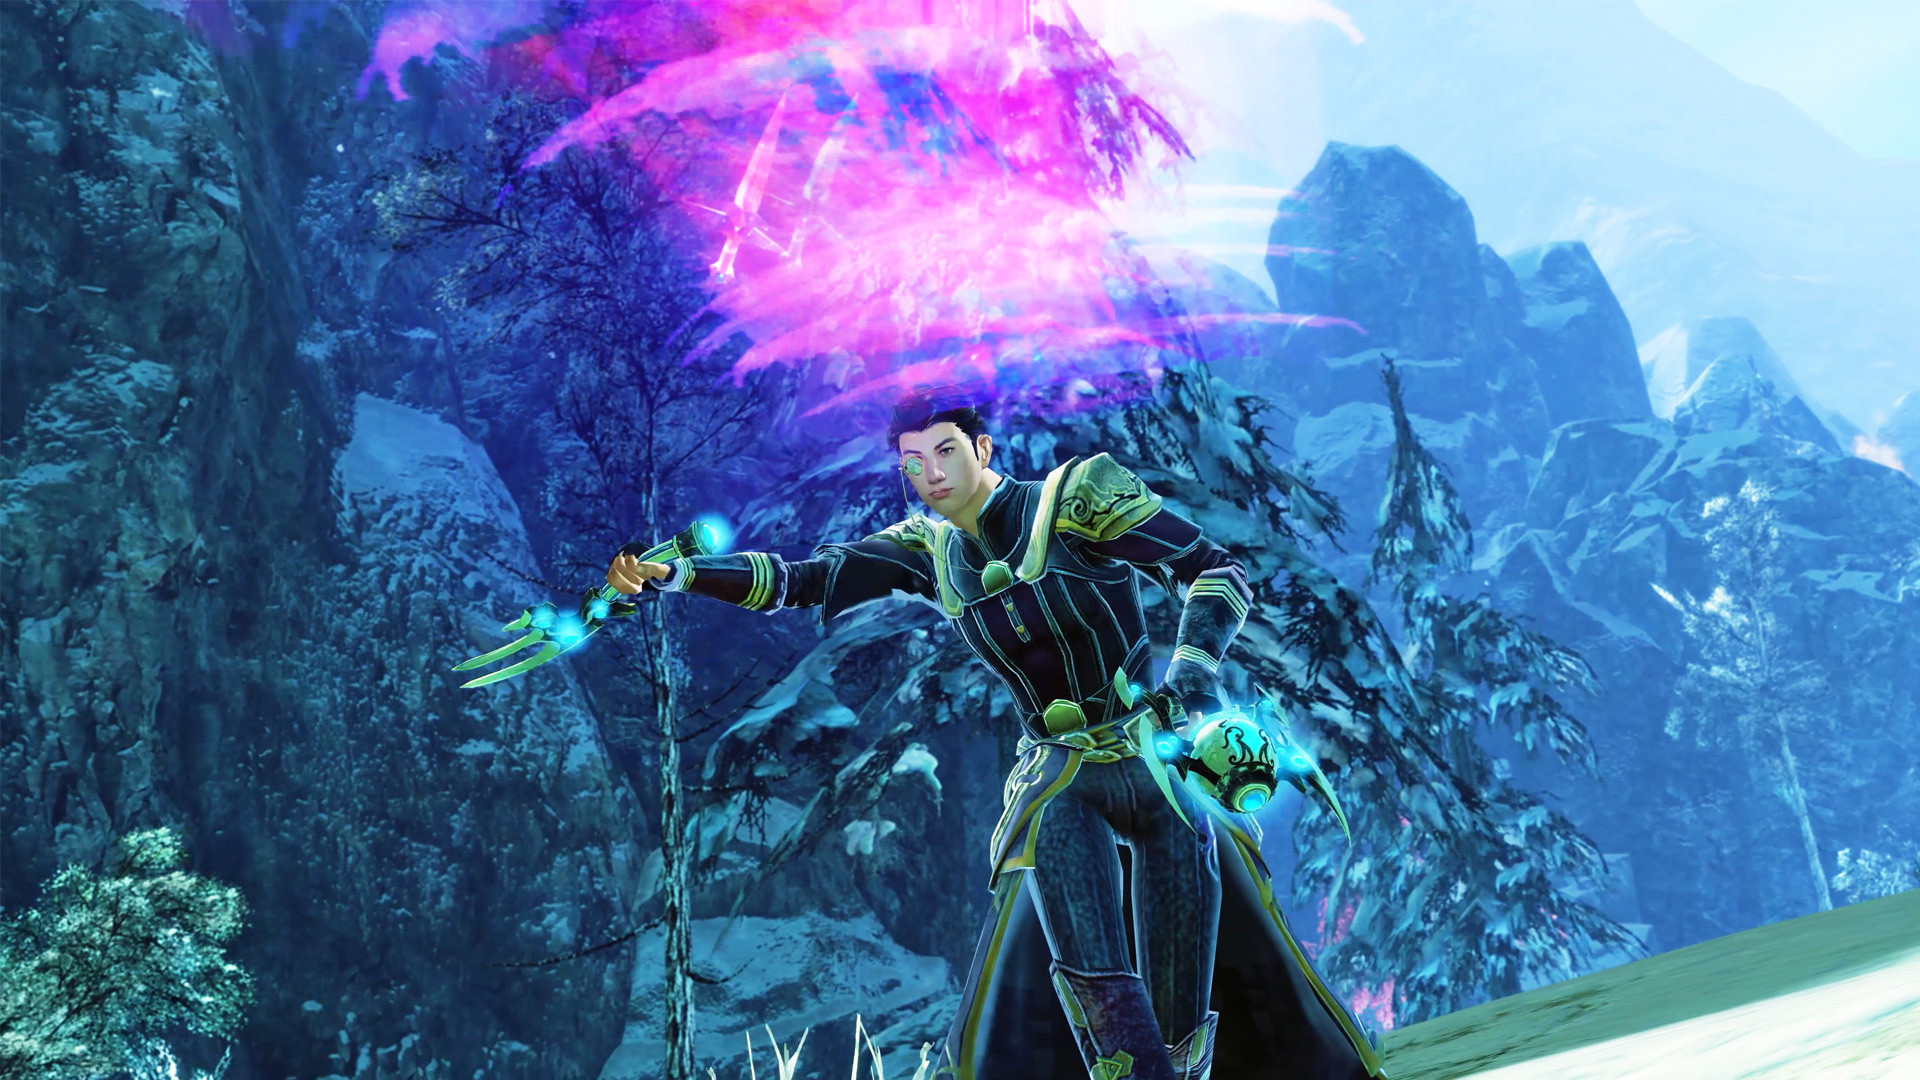 Guild Wars 2: End of Dragons™ Expansion Featured Screenshot #1